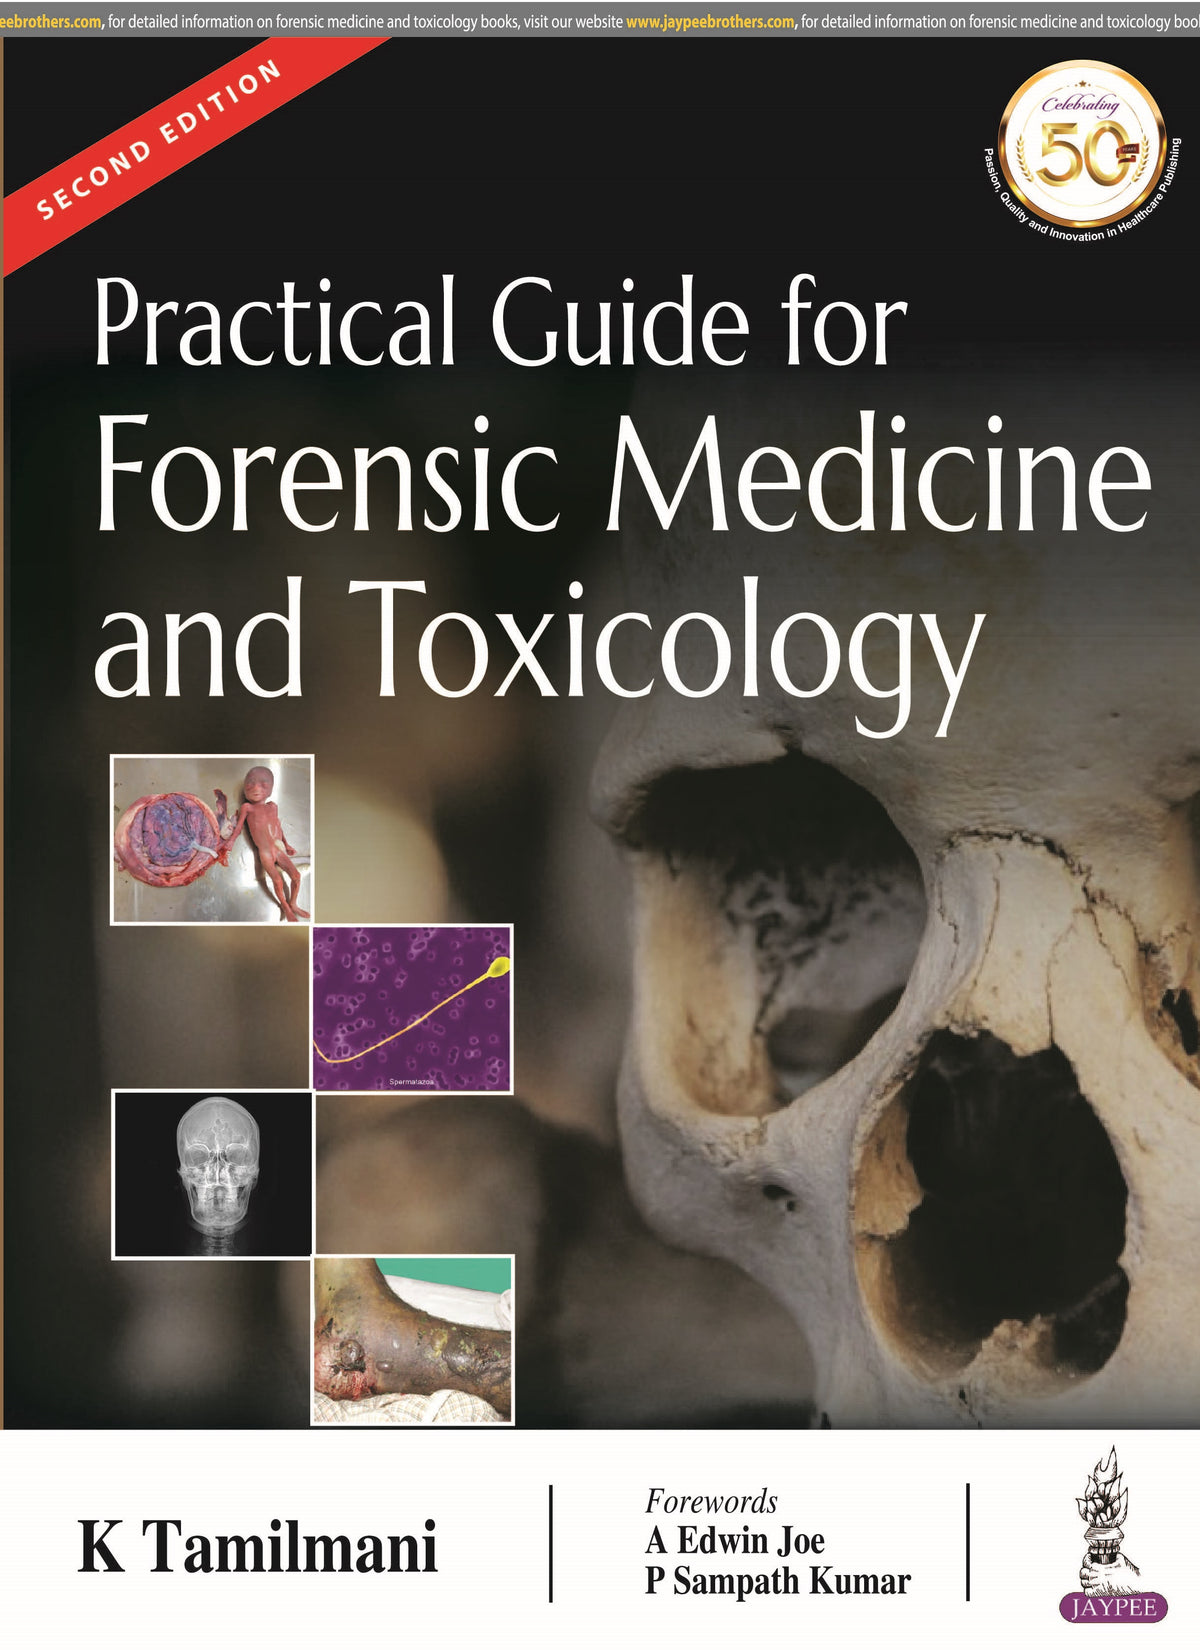 PRACTICAL GUIDE FOR FORENSIC MEDICINE AND TOXICOLOGY,2/E,K TAMILMANI